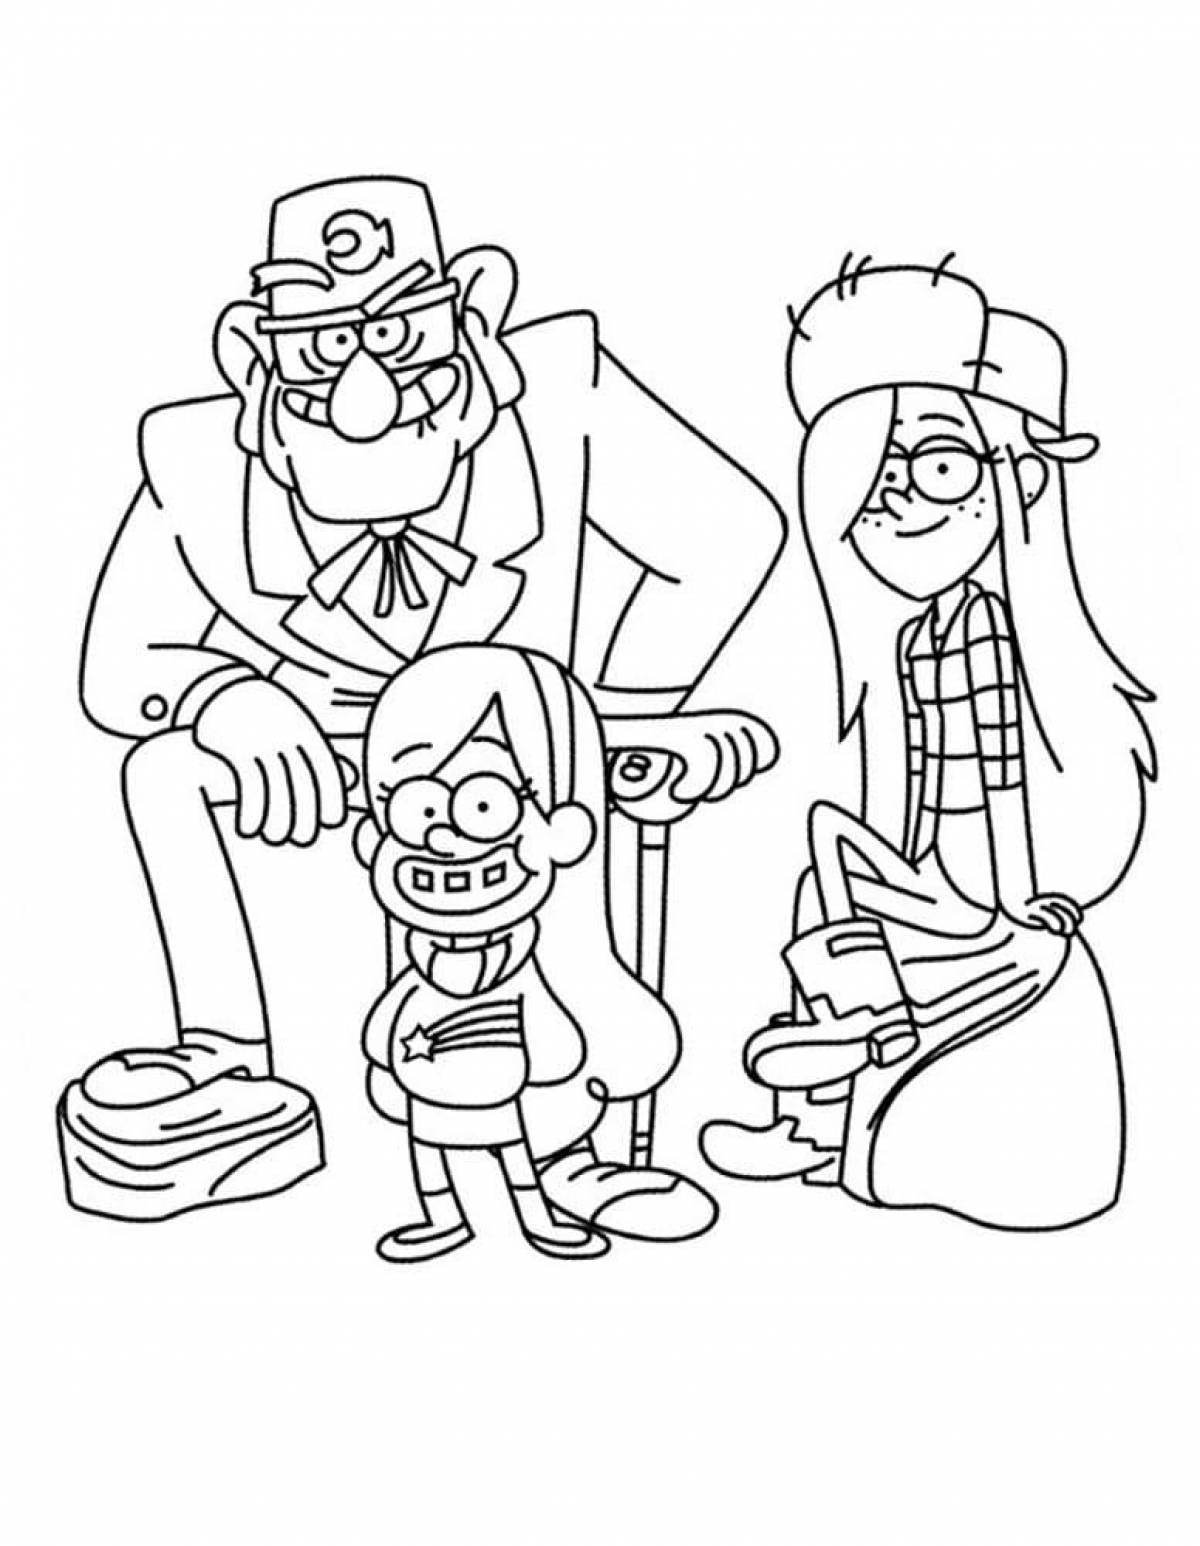 Gravity falls in good quality #5